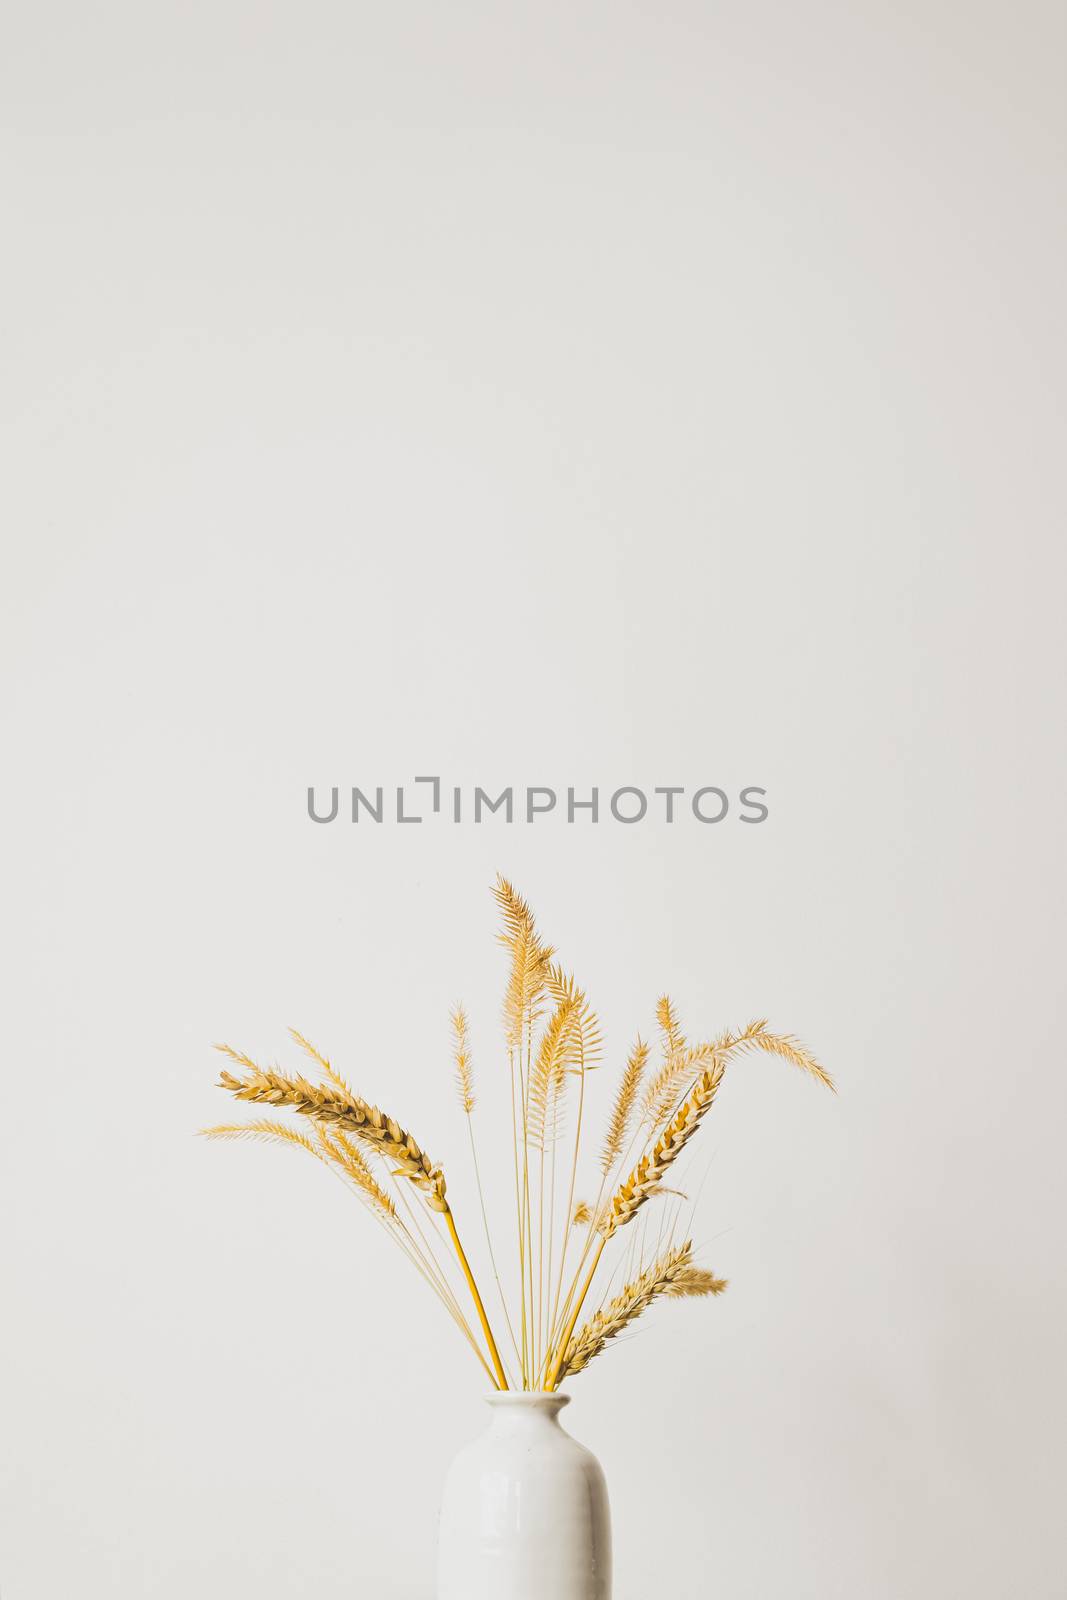 Spikelets or wheat in a vase. by photoboyko